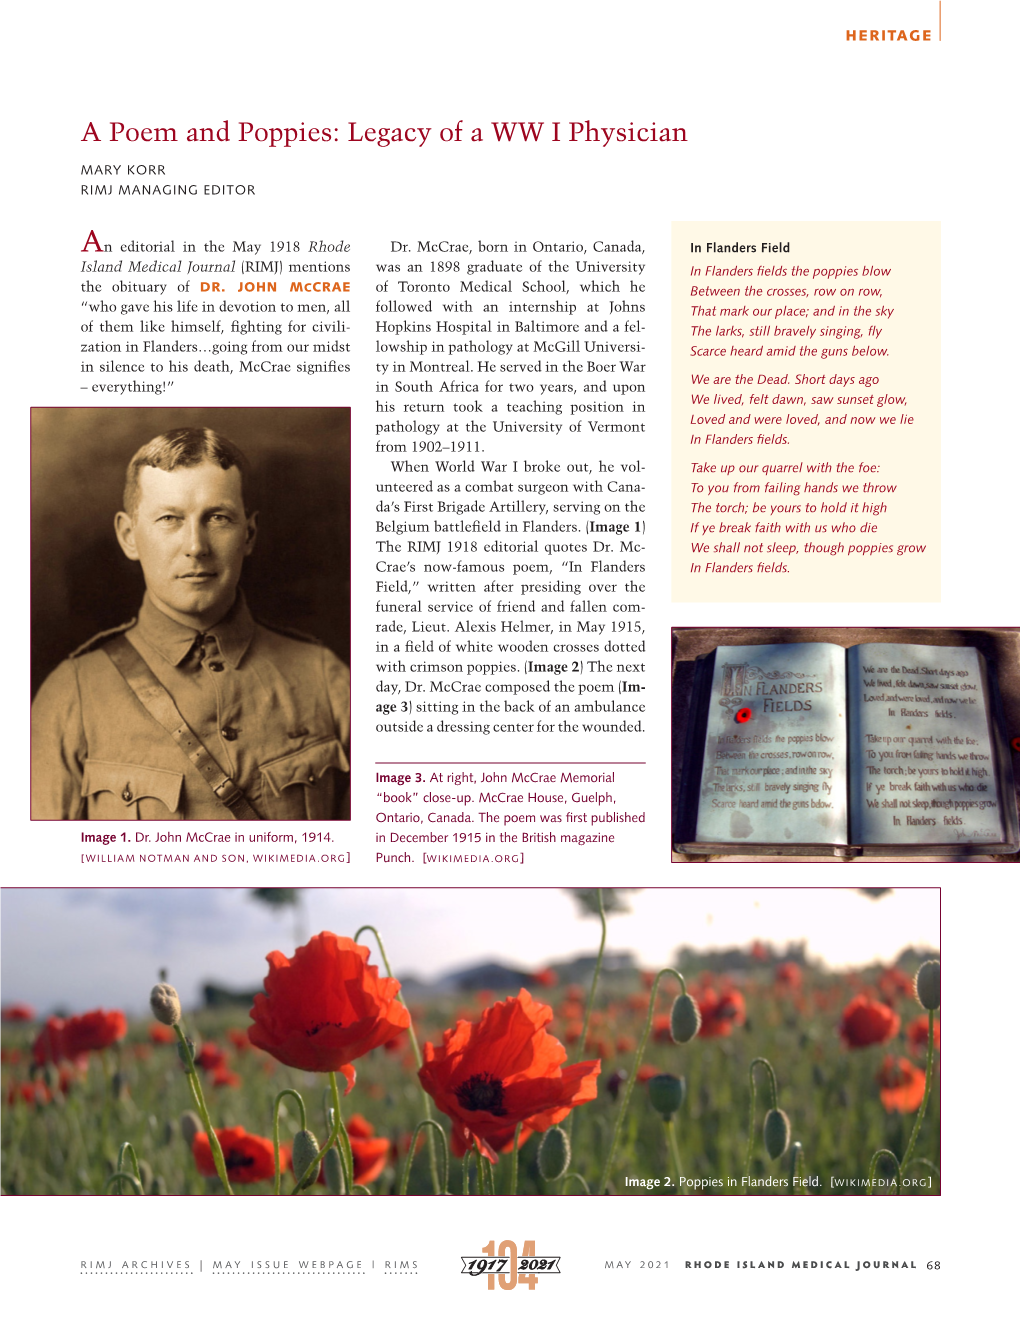 A Poem and Poppies: Legacy of a WW I Physician